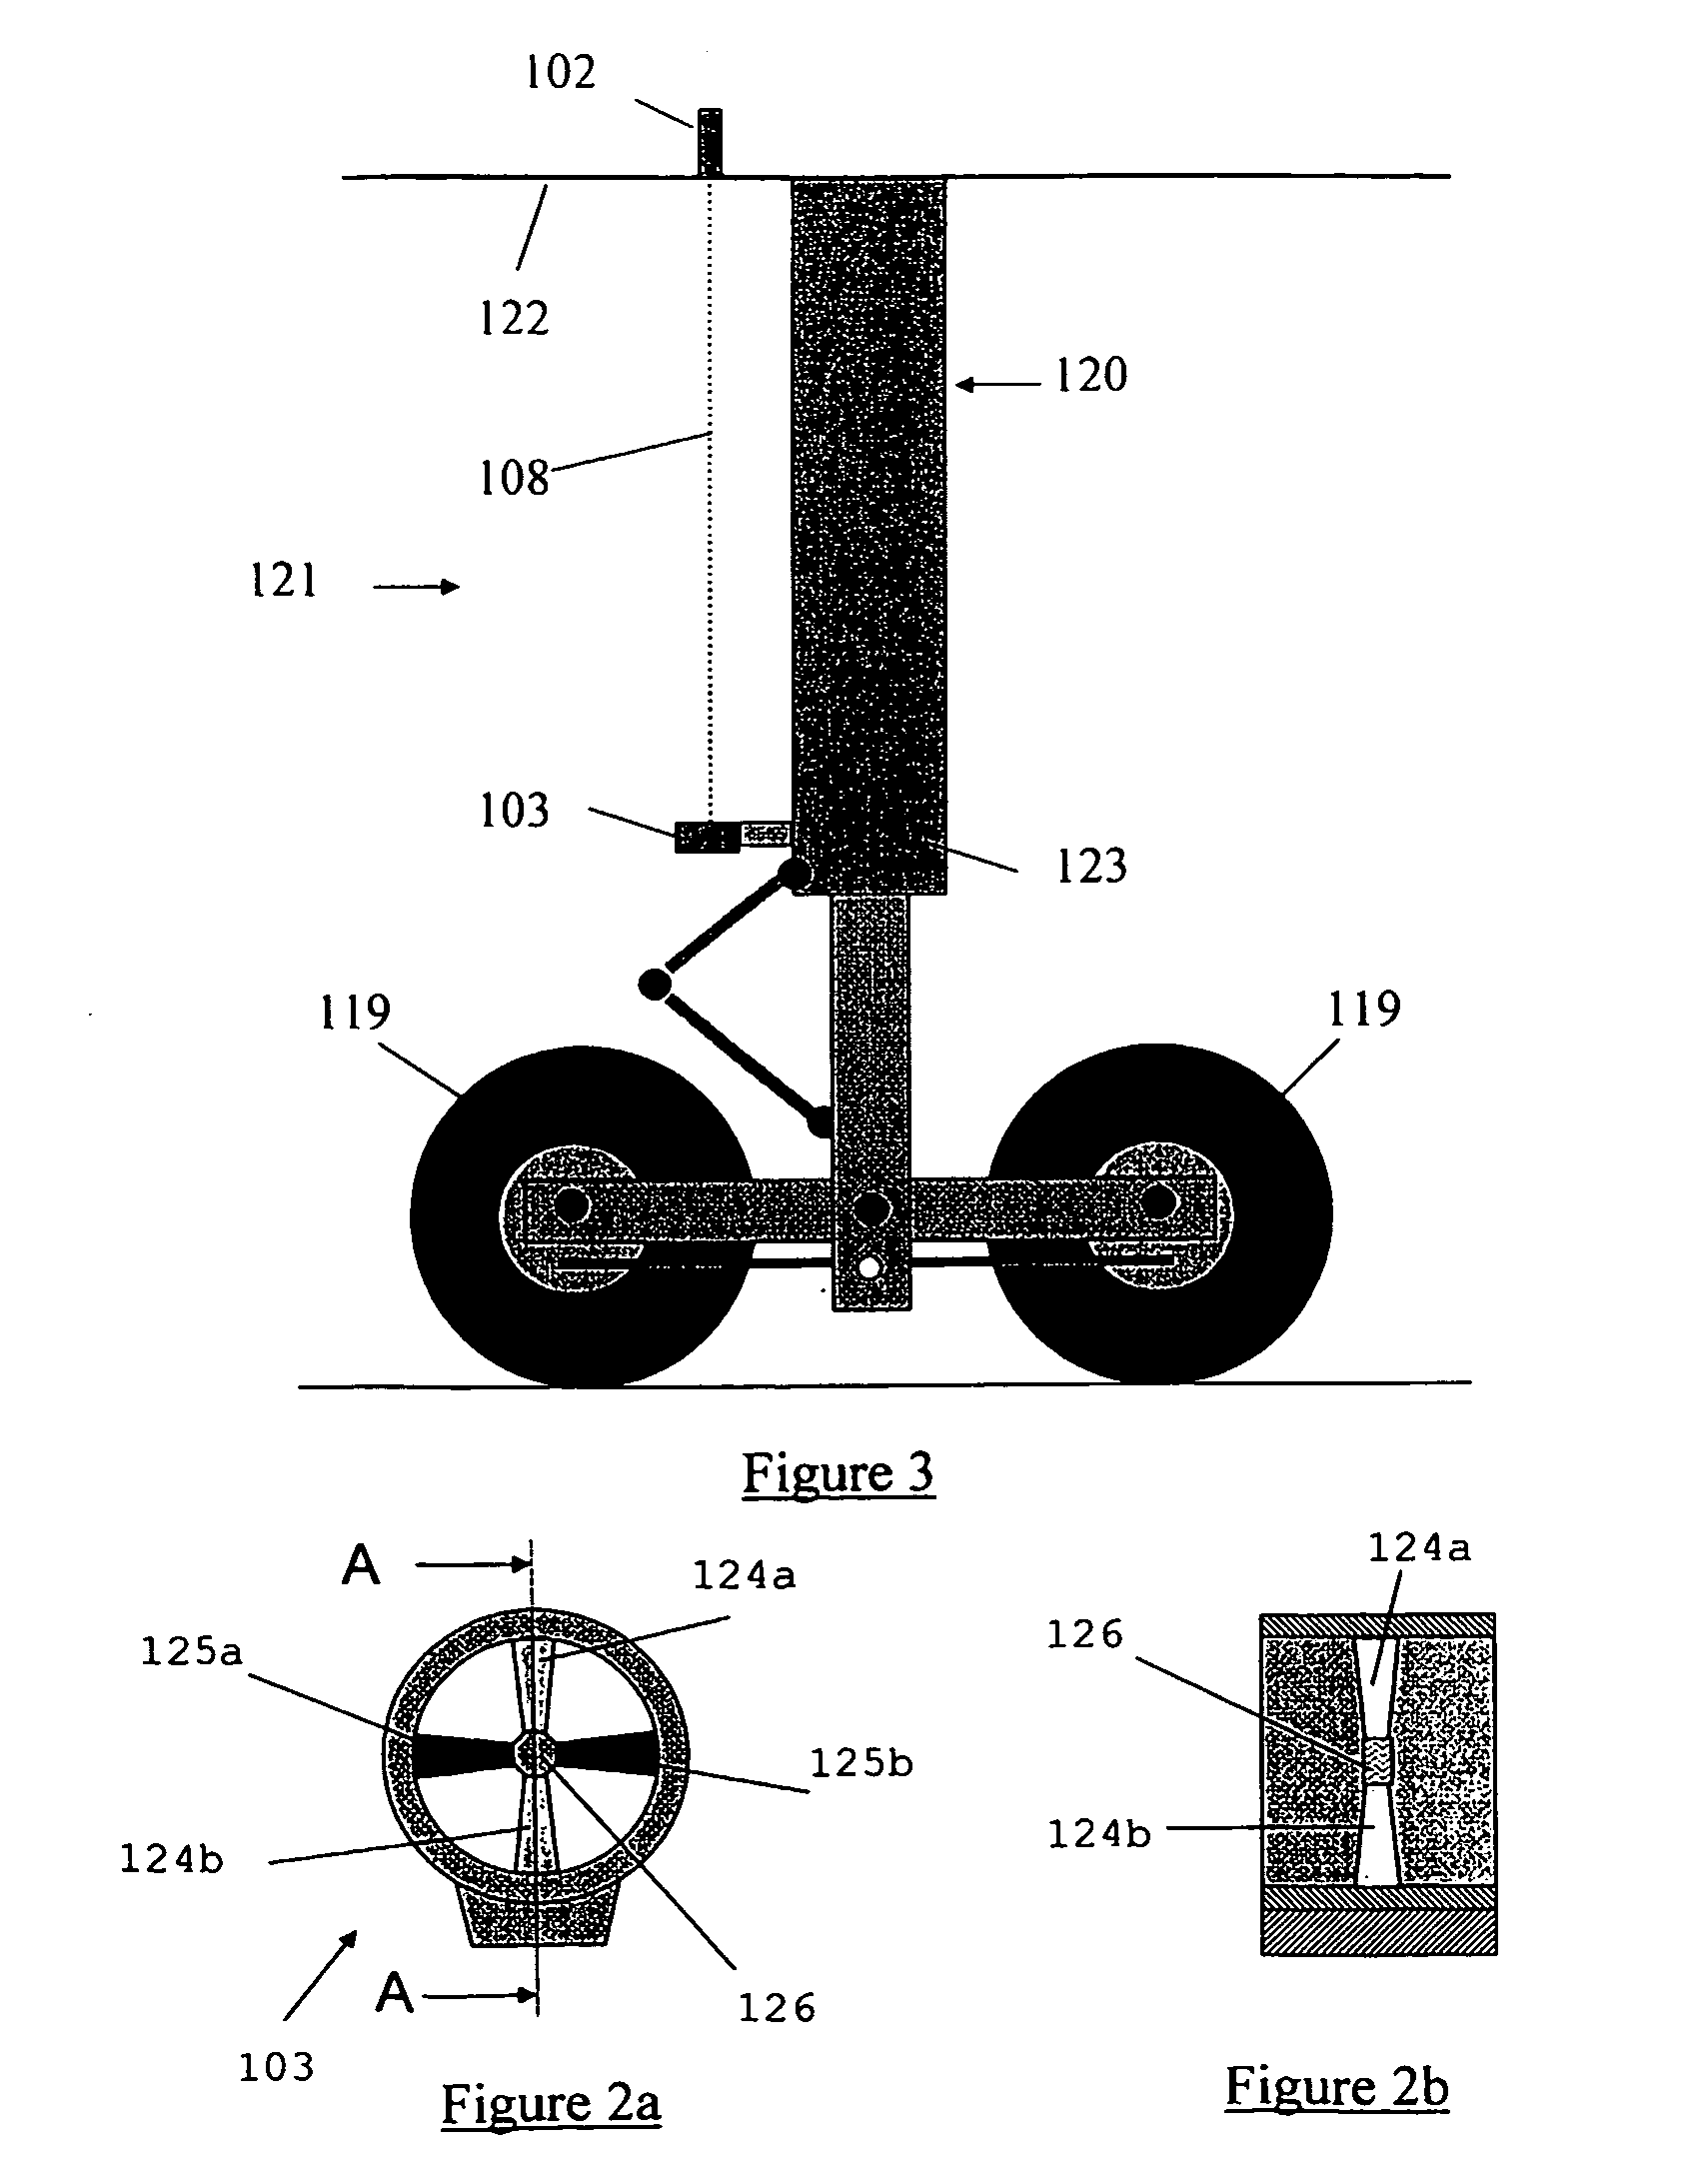 Method and apparatus suitable for measuring the displacement or load on an aircraft component